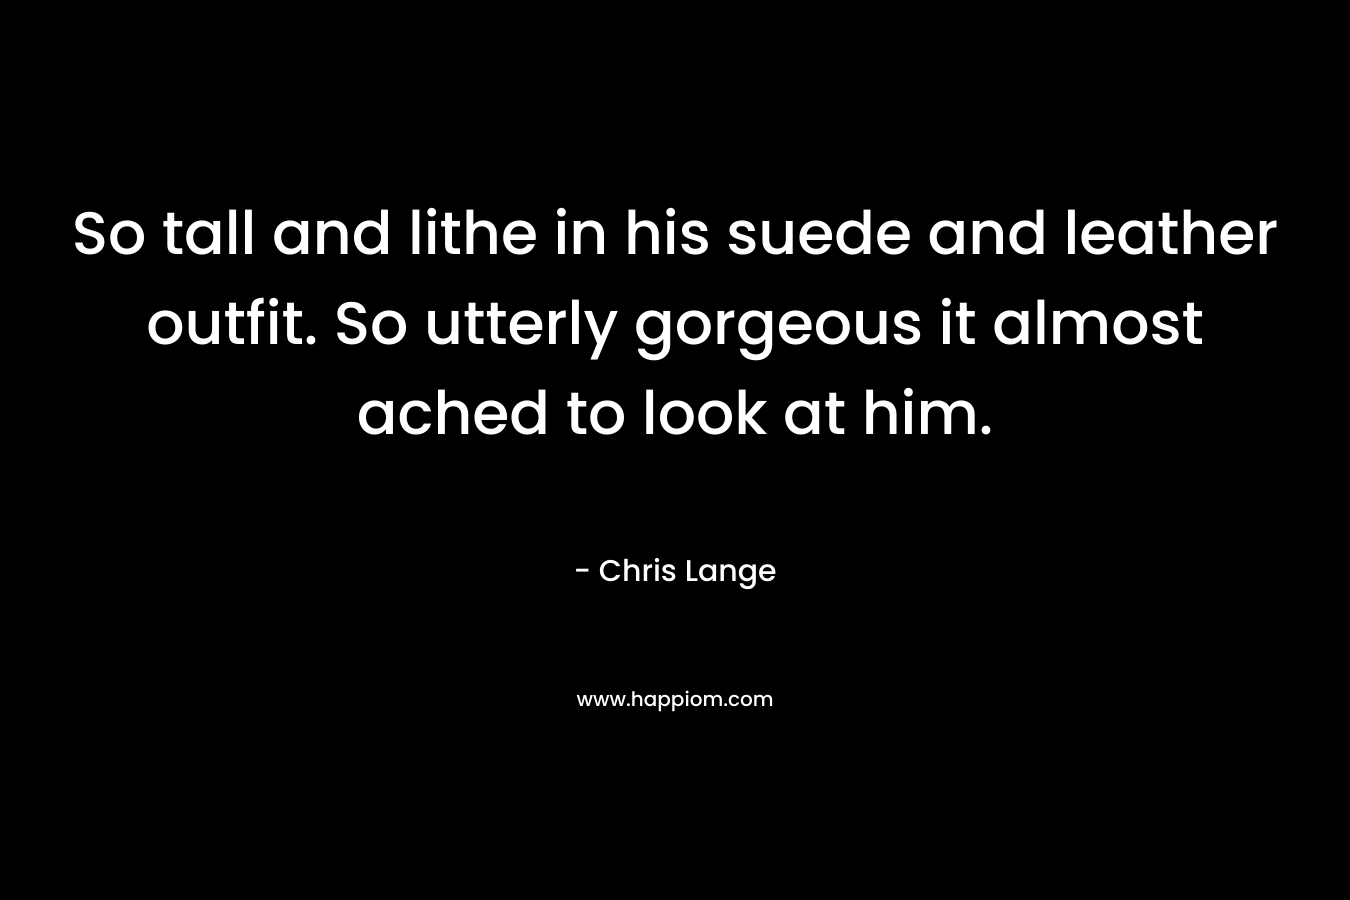 So tall and lithe in his suede and leather outfit. So utterly gorgeous it almost ached to look at him. – Chris Lange